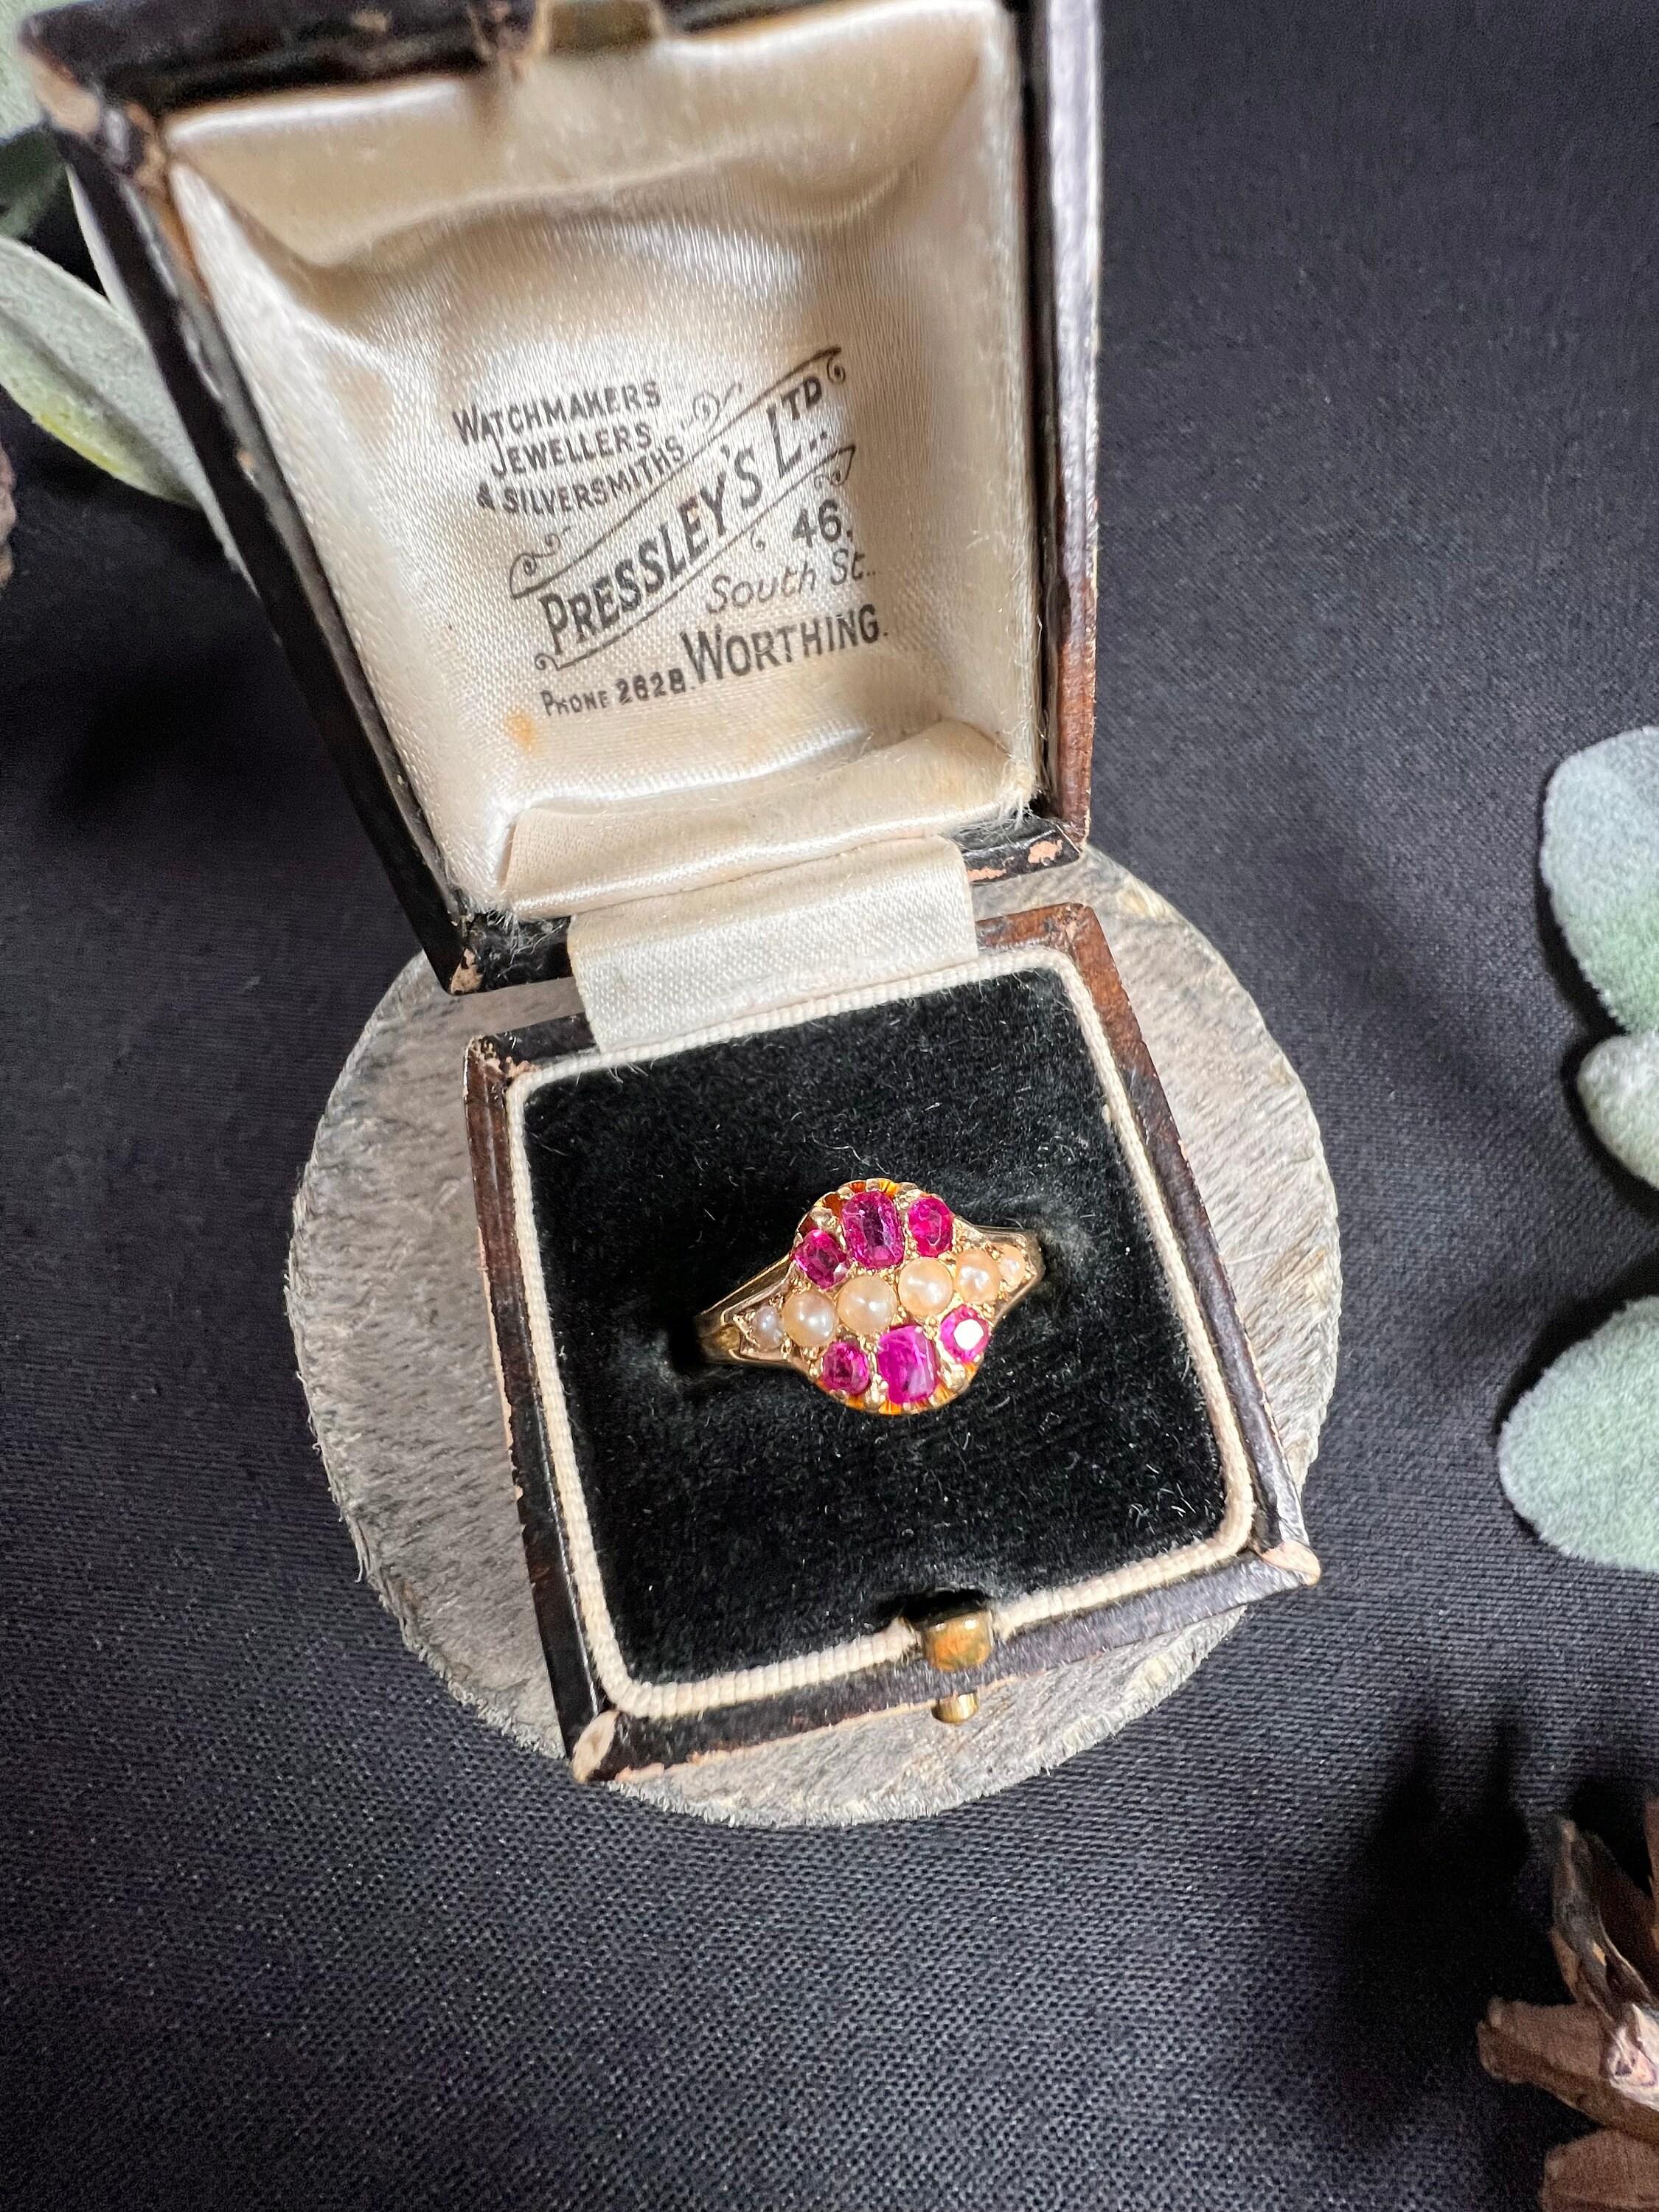 Antique Pearl & Ruby Ring

15ct Gold Stamped

Hallmarked Birmingham 1874

Makers Mark W G

This exquisite Victorian ring is crafted from 15ct yellow gold and features six lustrous seed pearls arranged elegantly across the centre of the band. The